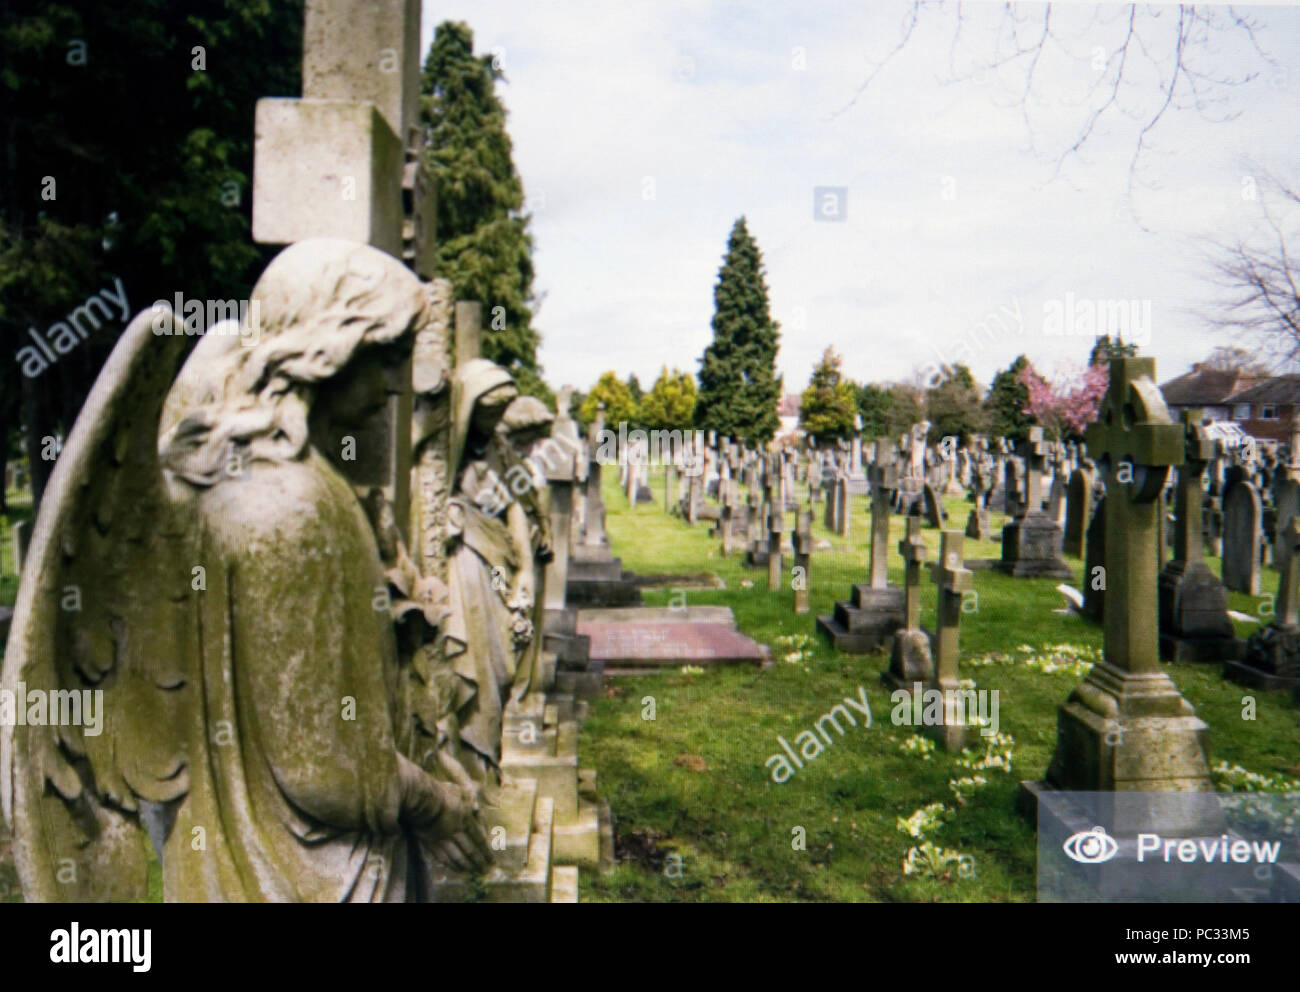 Alamy preview image of Brompton cemetery on London UK Stock Photo